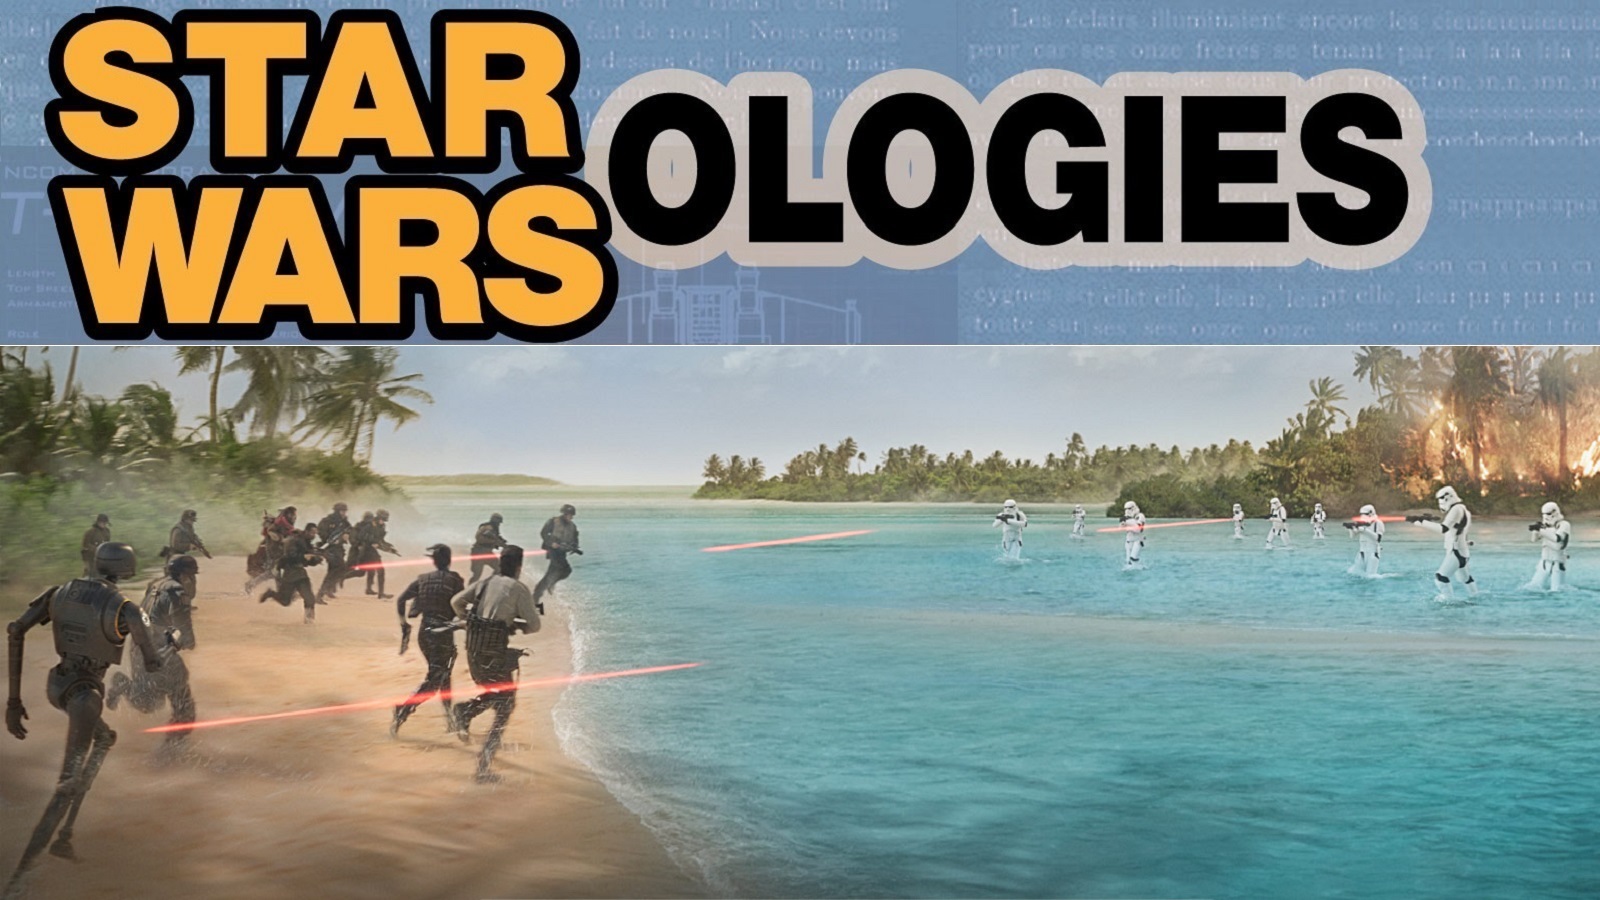 Star Warsologies Episode 13: Military History with Andrew Liptak